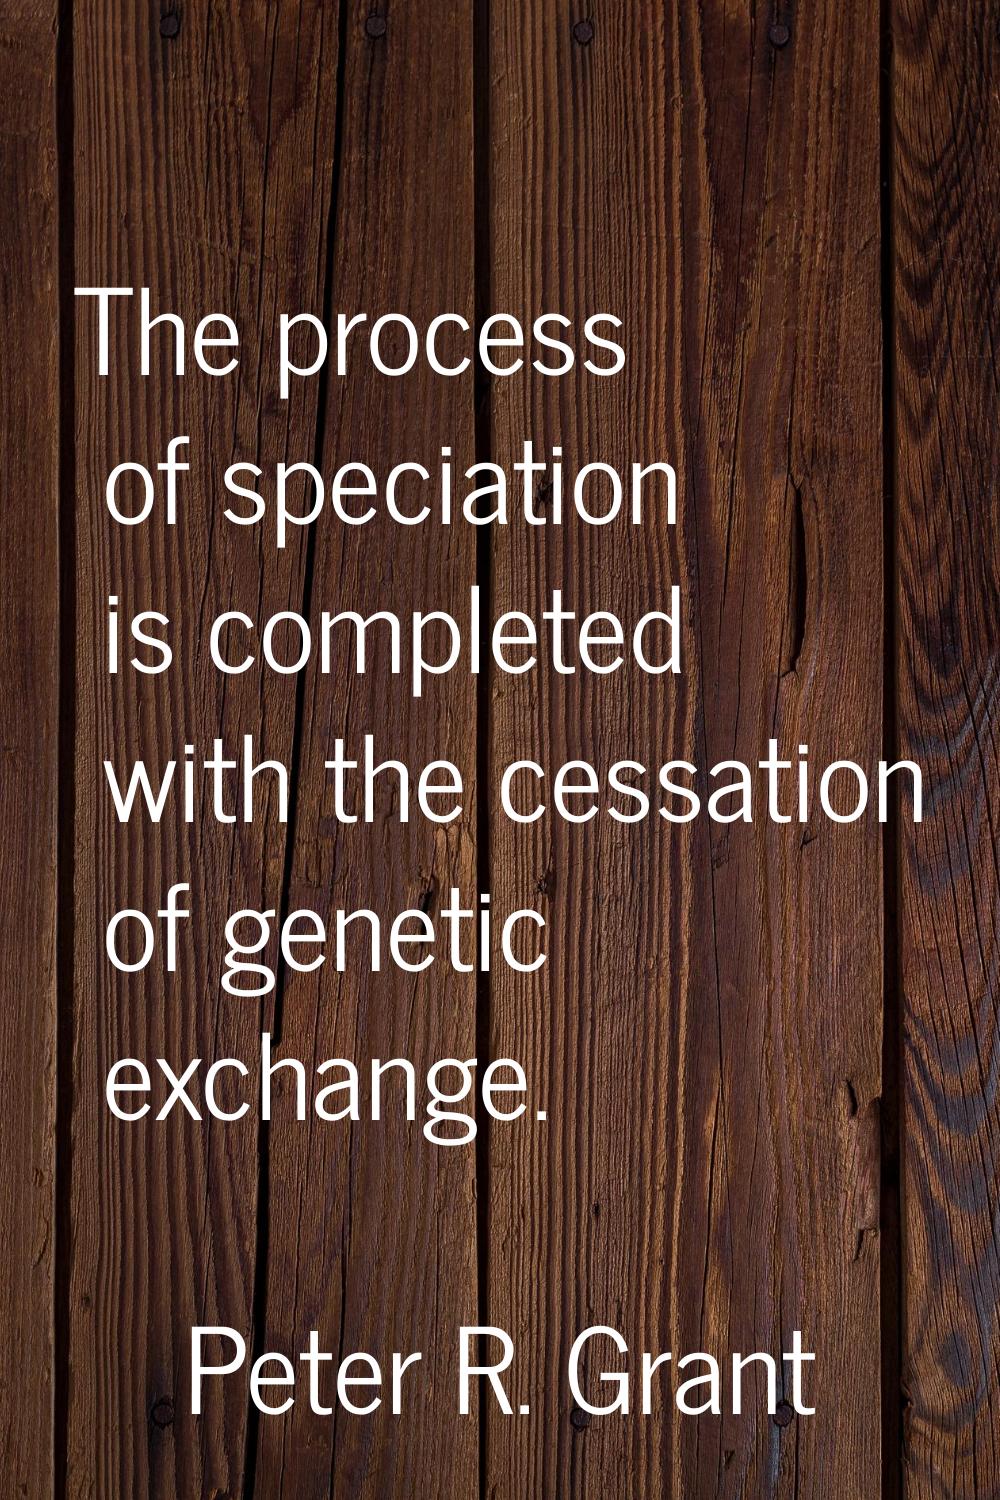 The process of speciation is completed with the cessation of genetic exchange.